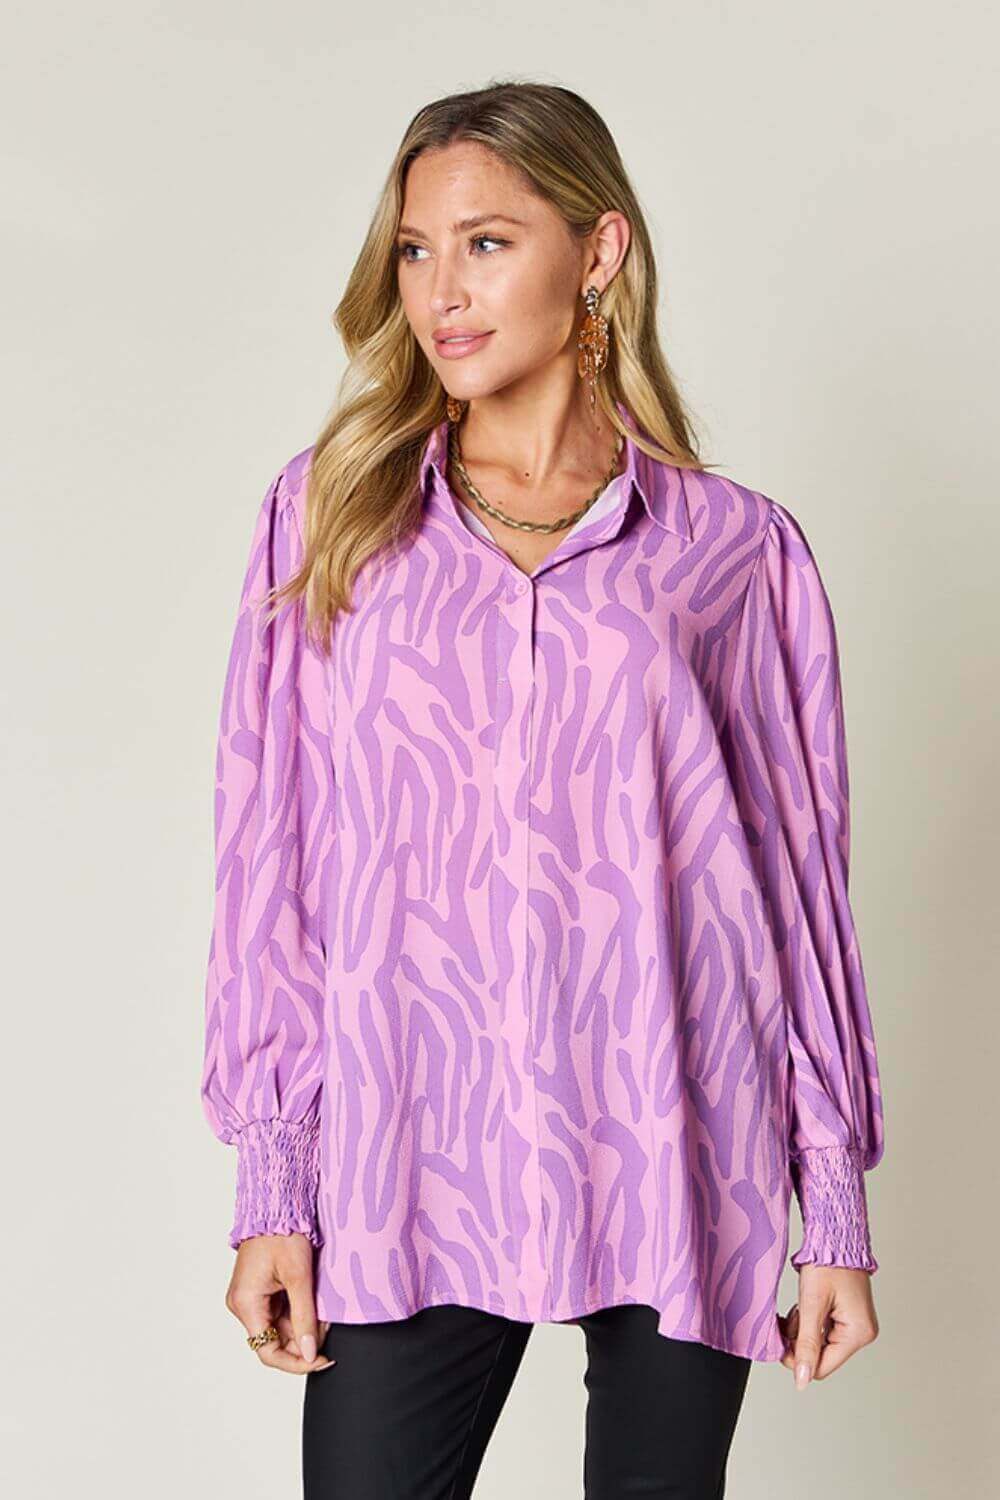 DOUBLE TAKE Full Size Printed Smocked Long Sleeve Blouse at Bella Road